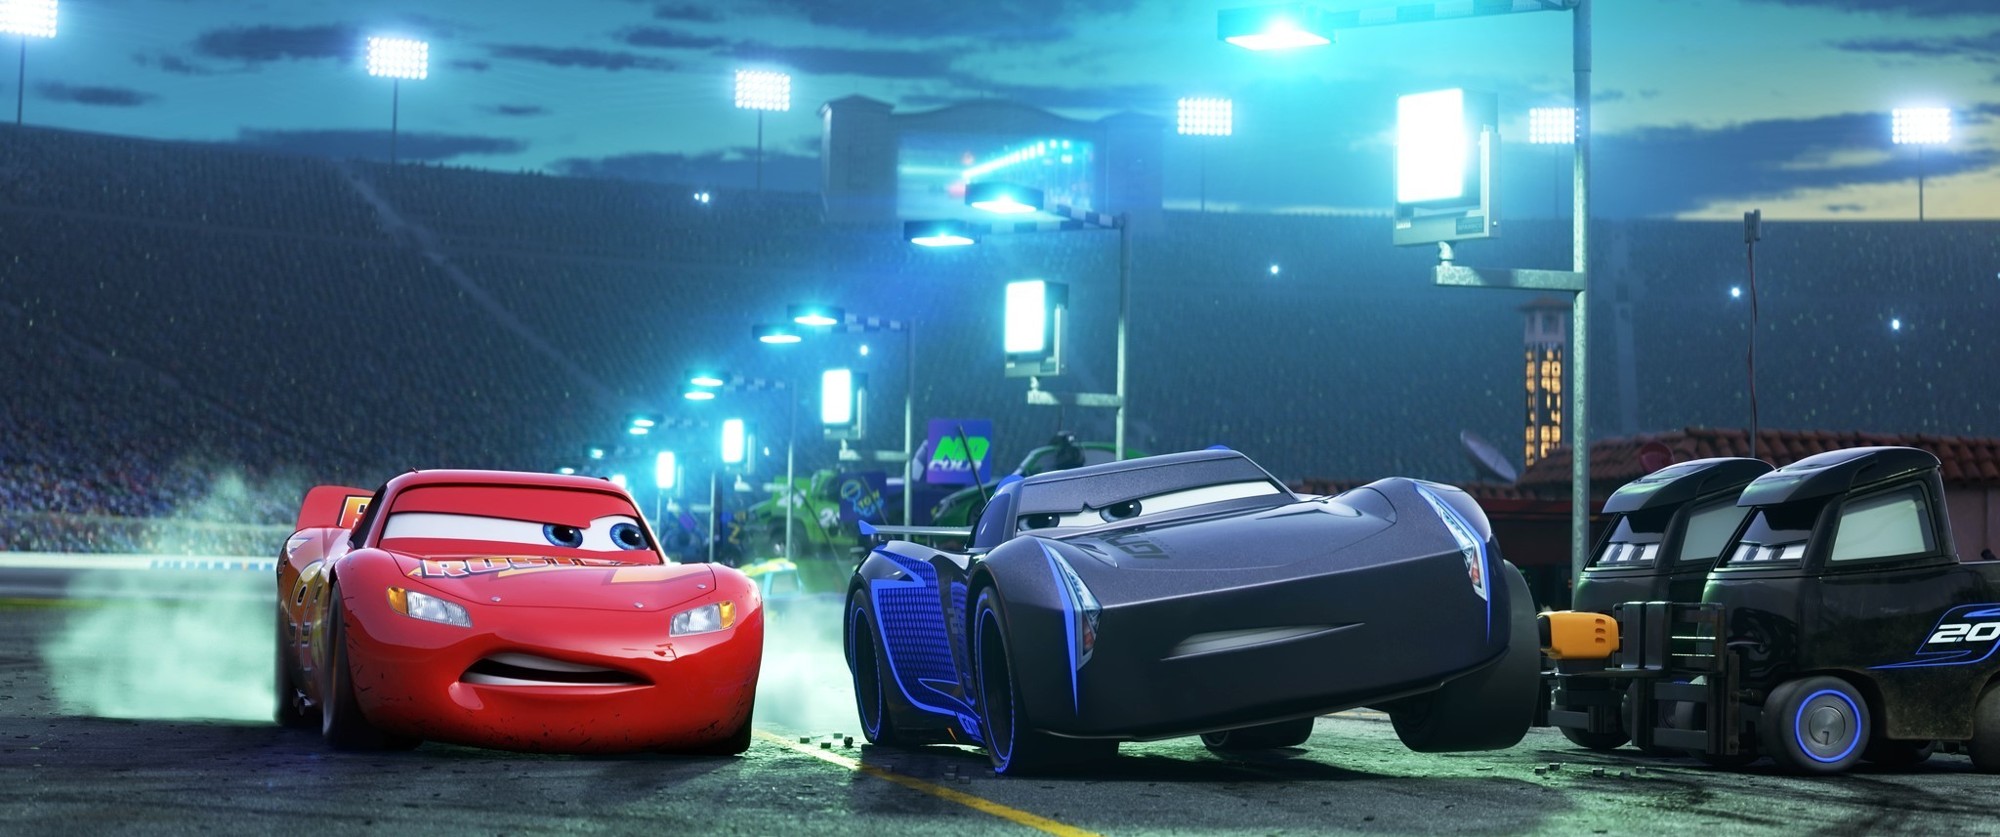 Lightning McQueen and Jackson Storm from Walt Disney Pictures' Cars 3 (2017)